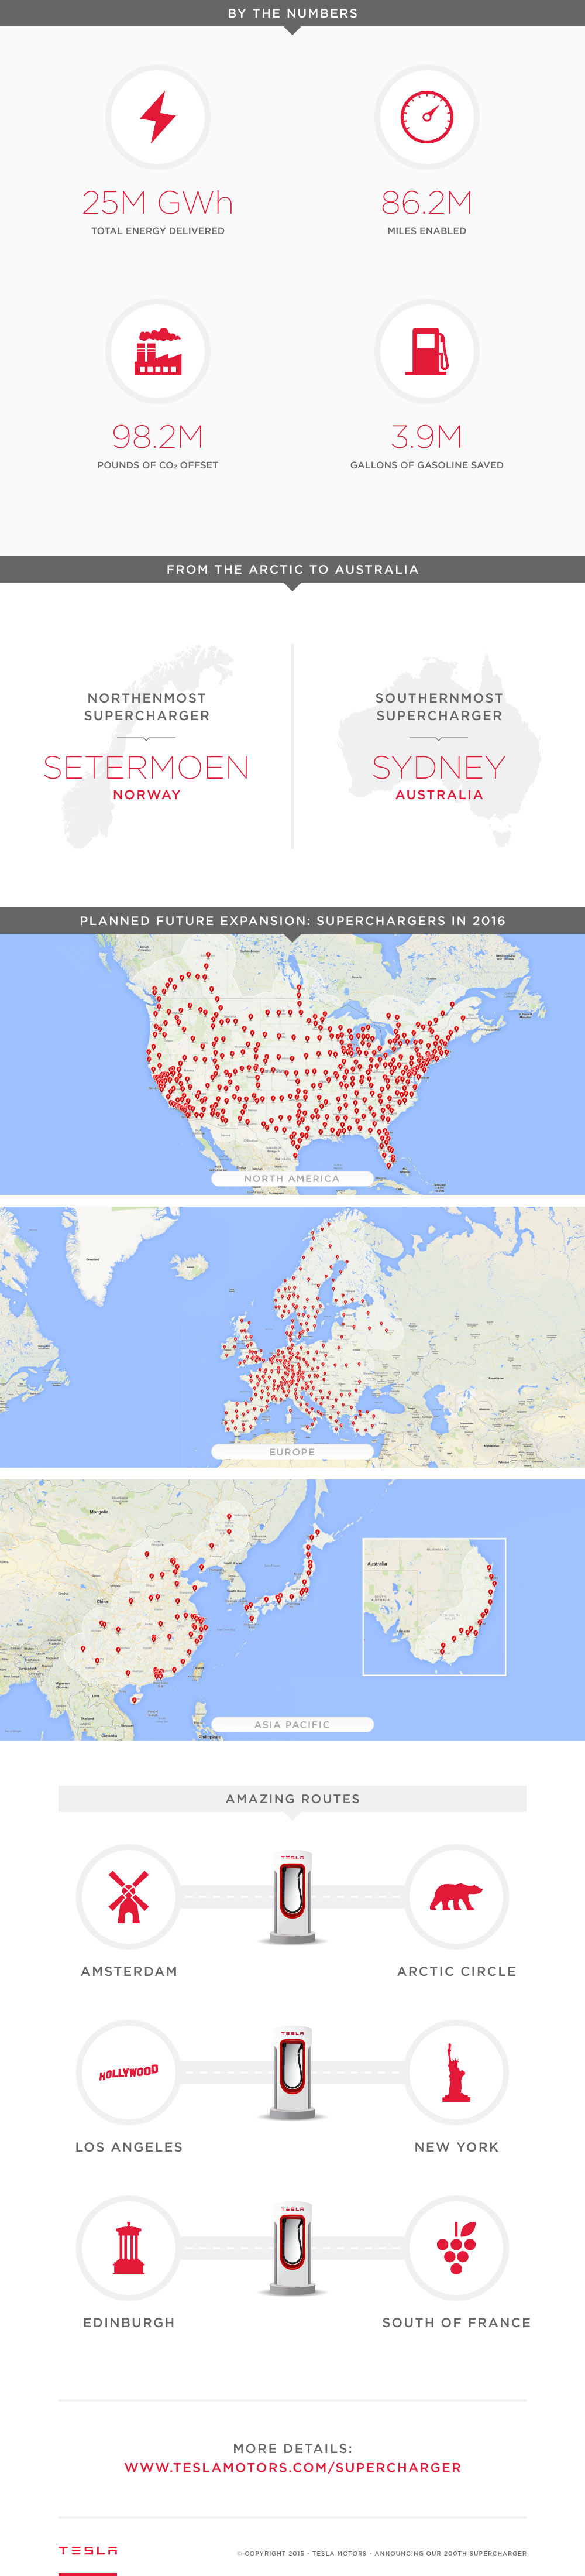 tesla-2000th-supercharger-infographic